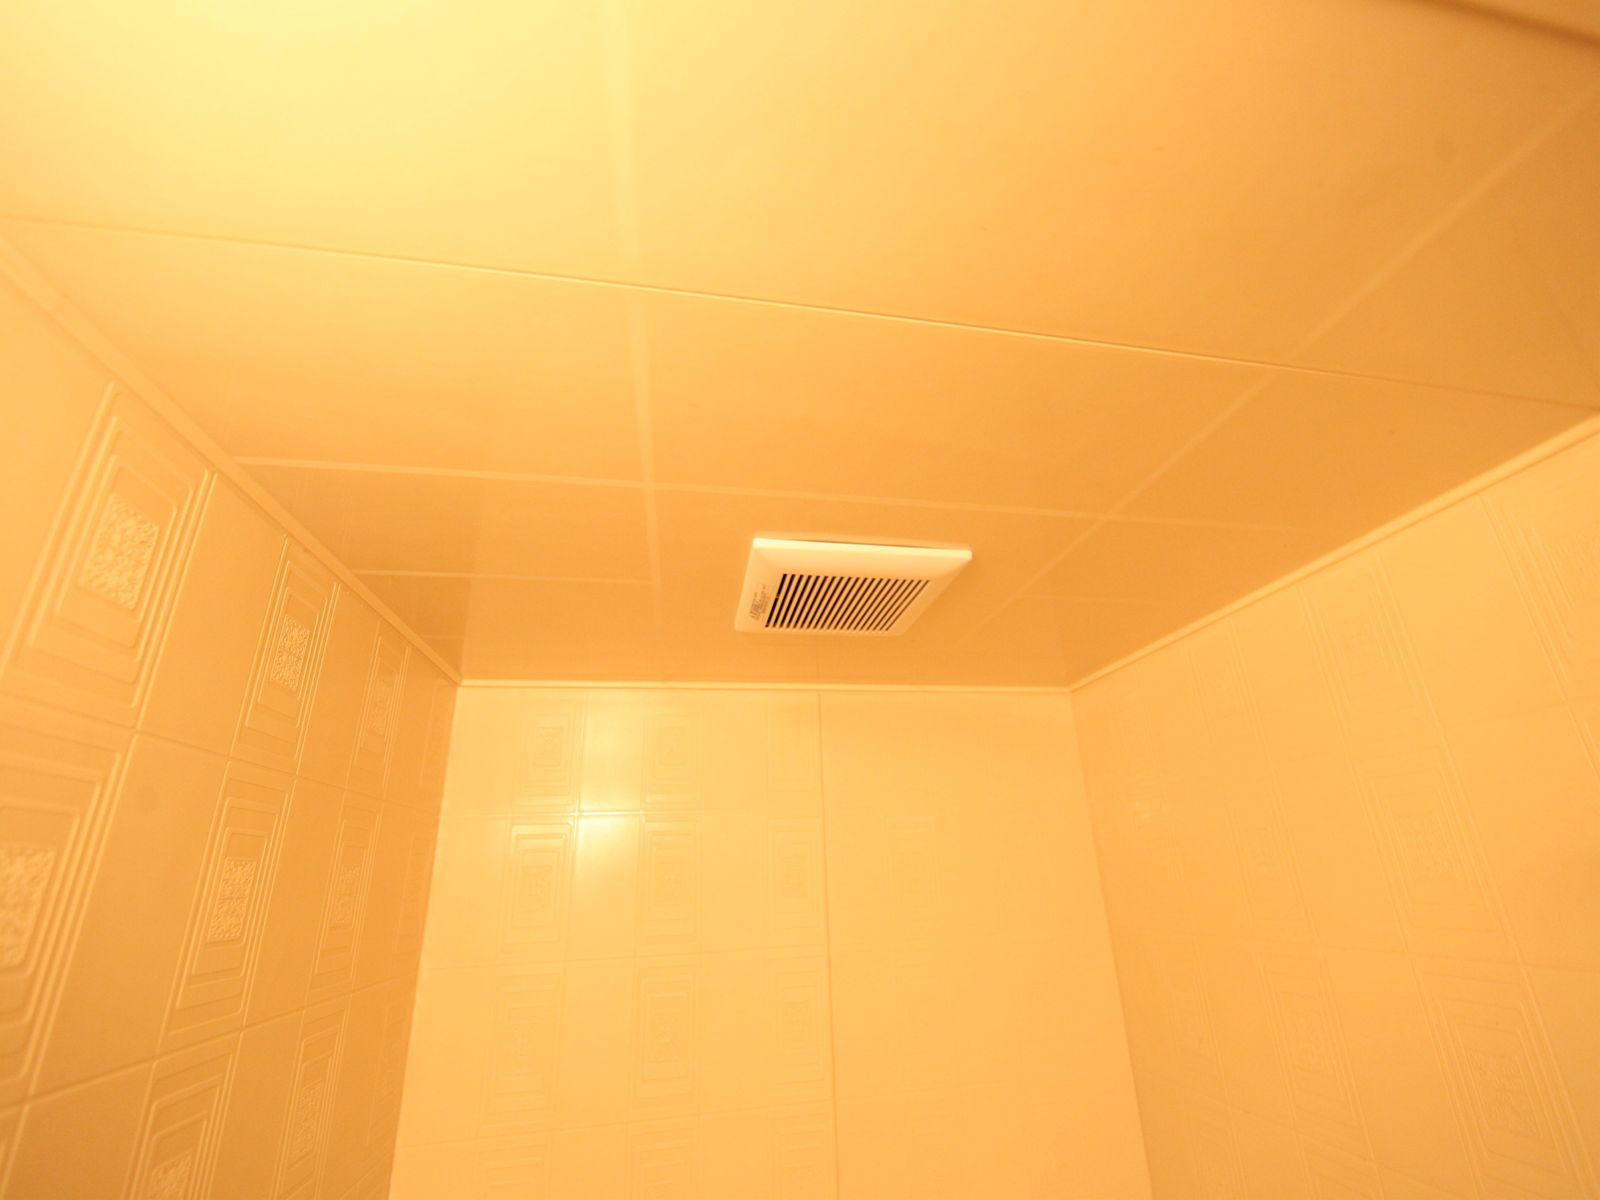 Other. Bathroom With ventilation fan